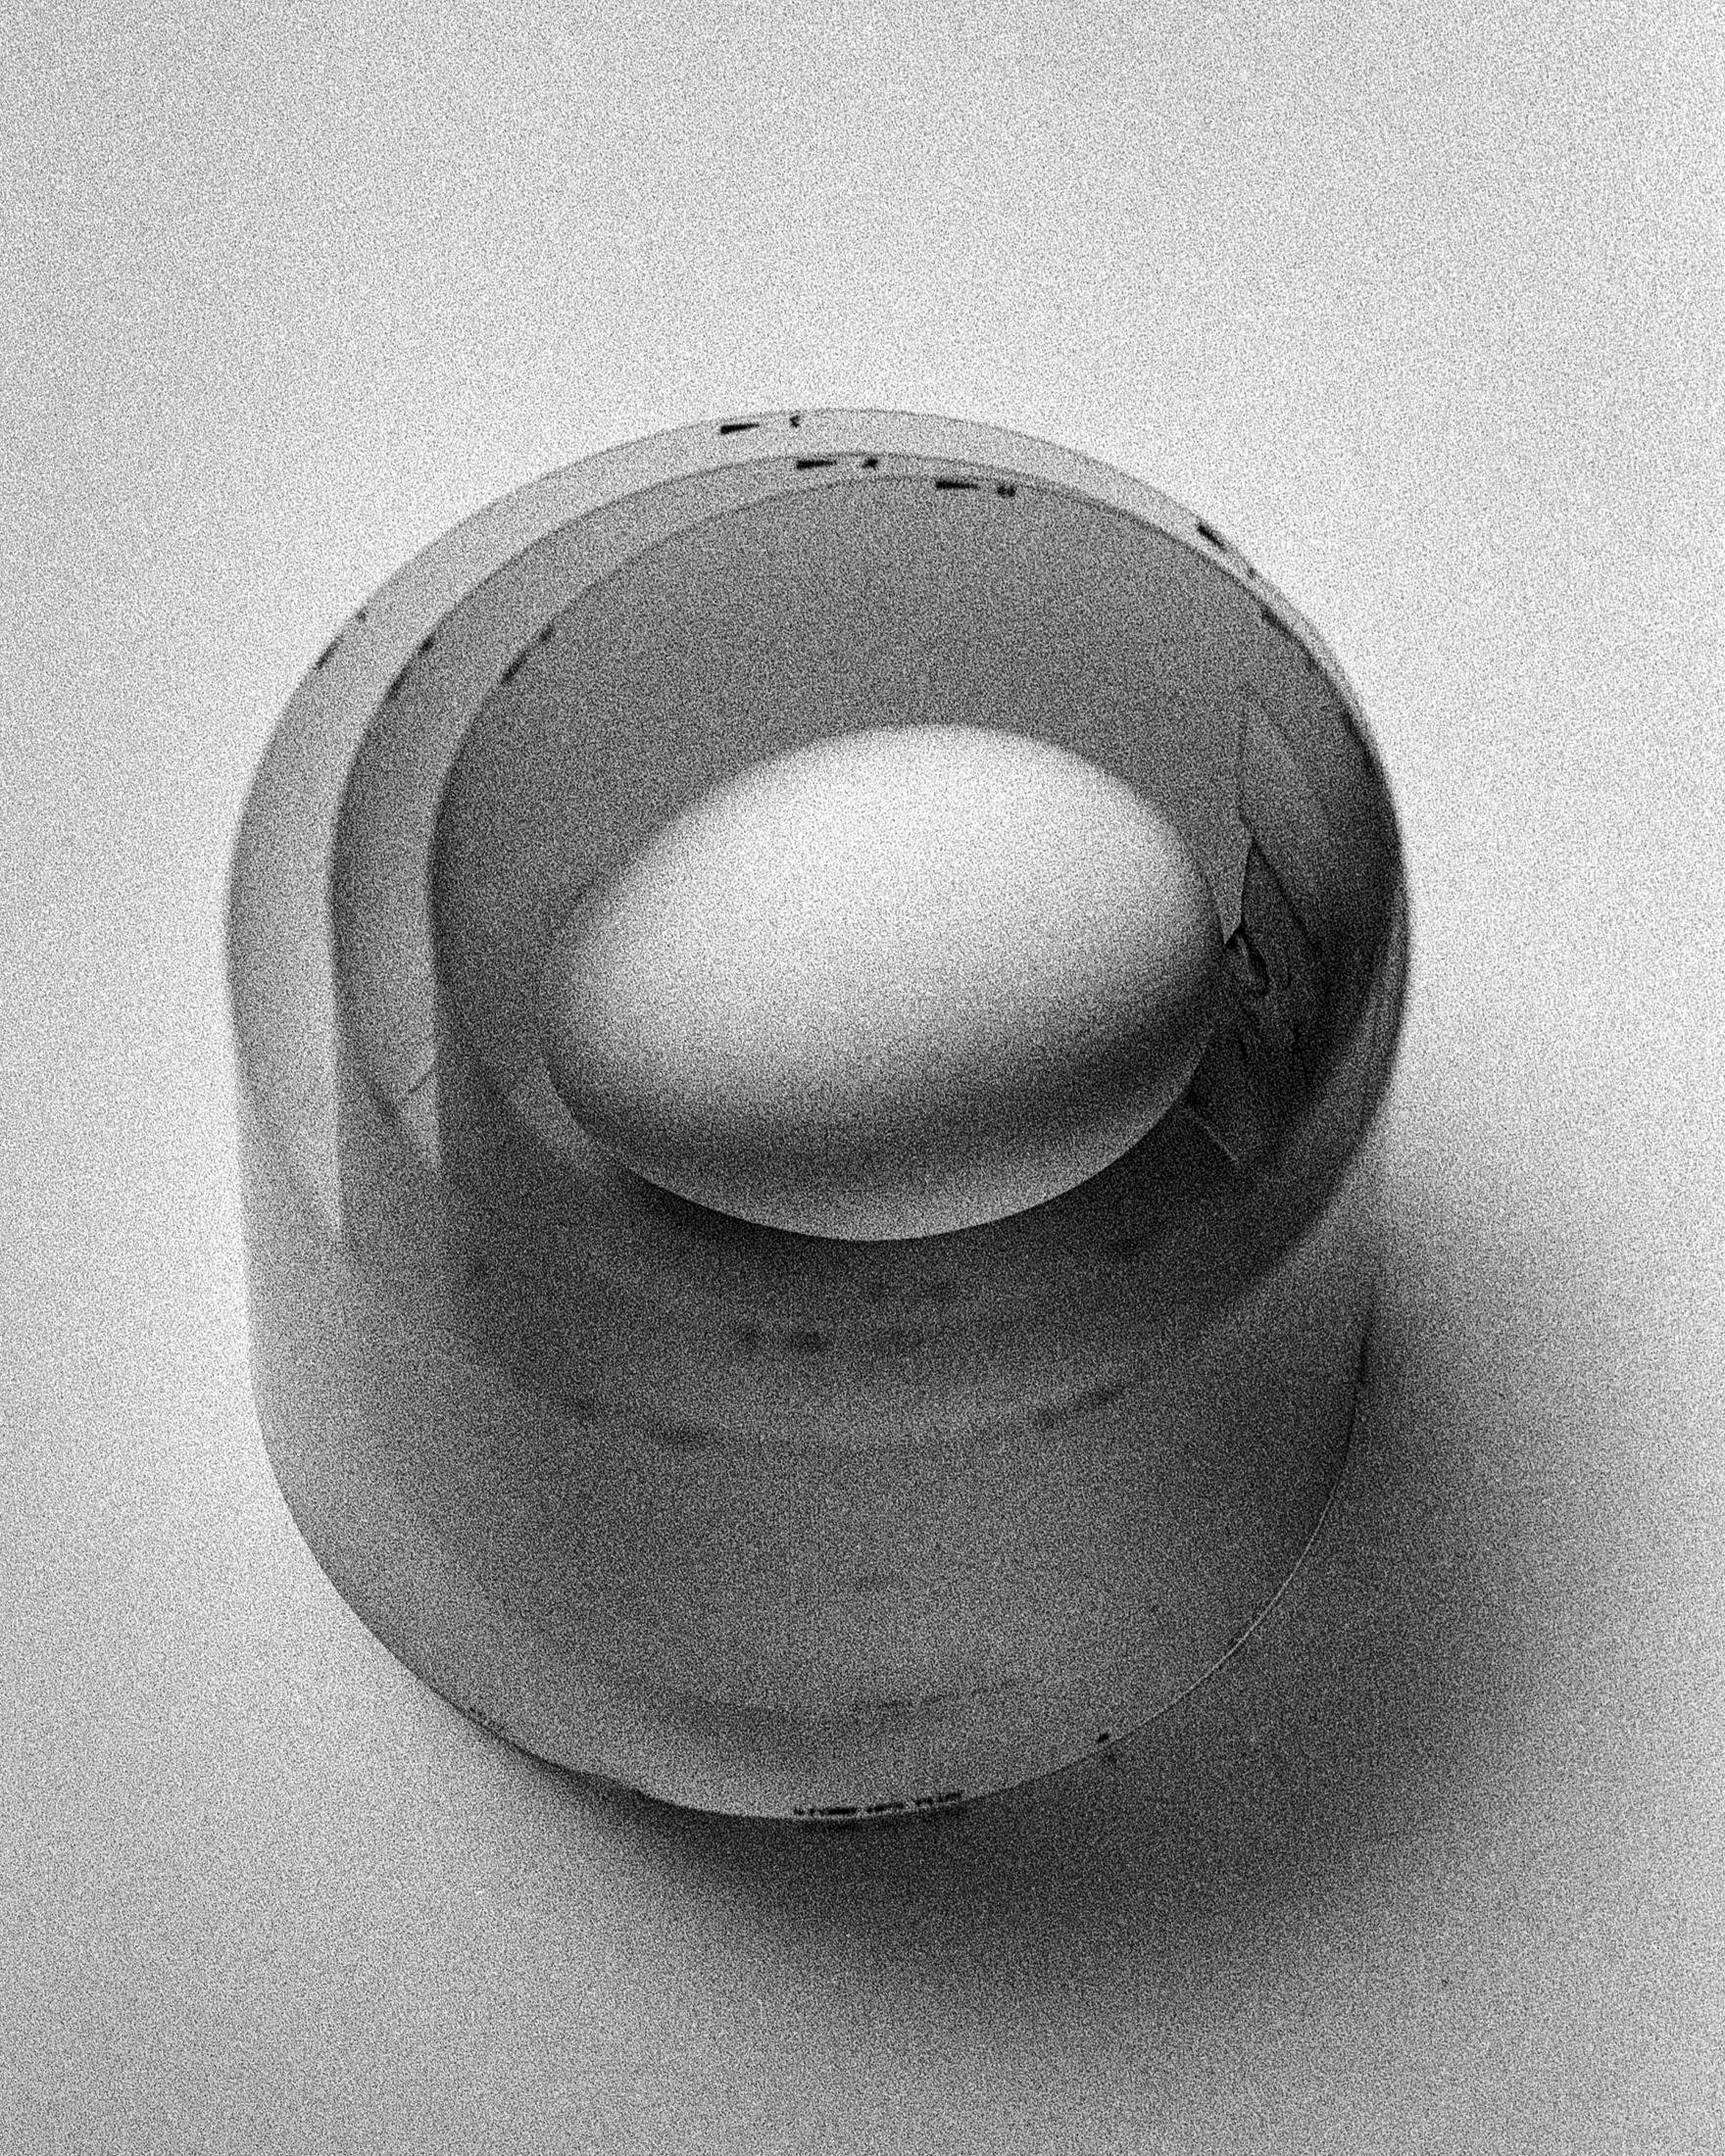 Shine Huang Abstract Photograph - Egg Study 6. Still Life . Black and White Silver Gelatin Print